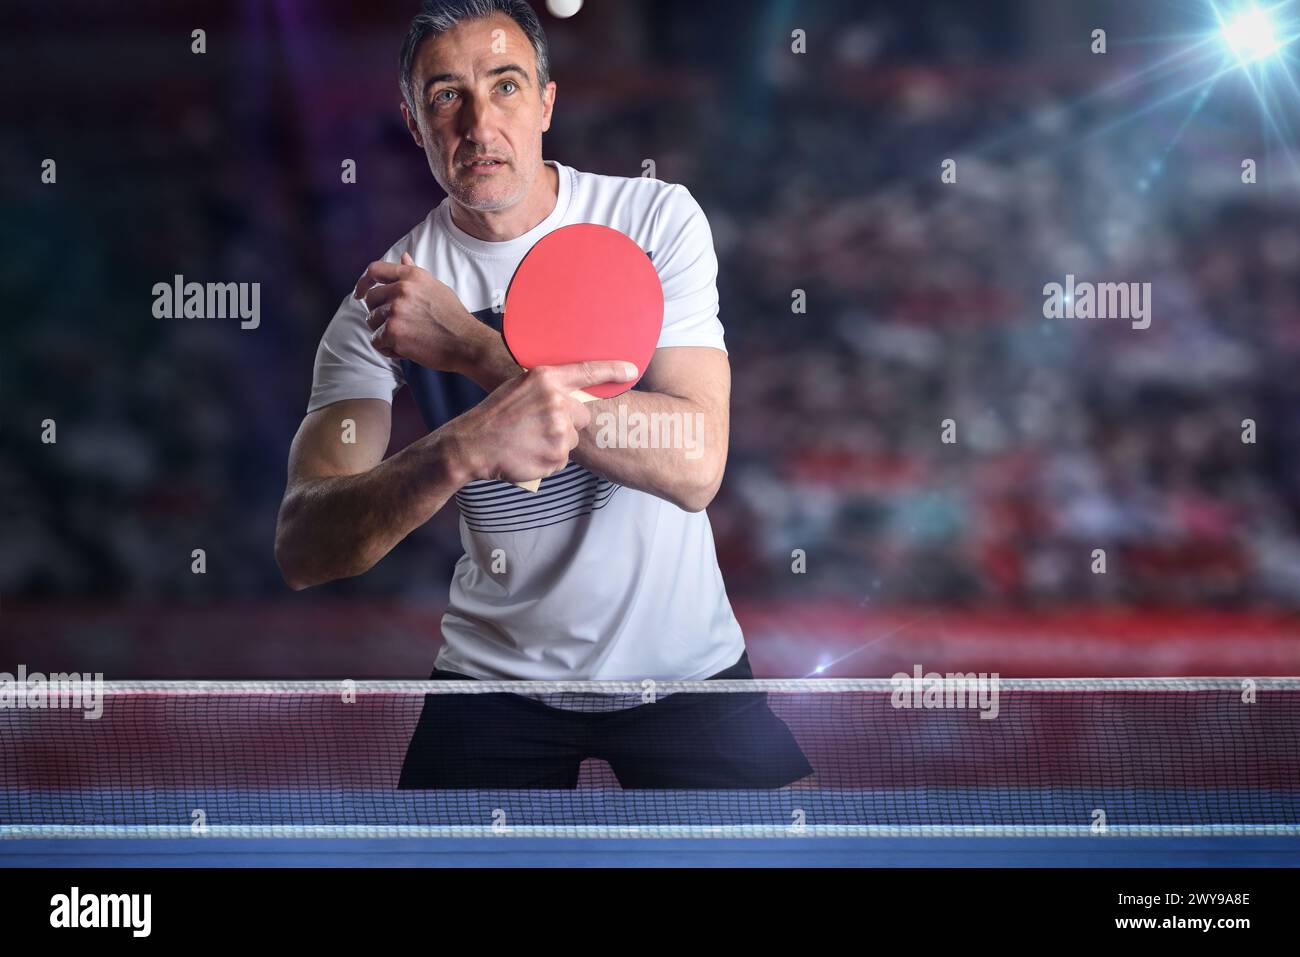 Attentive ping-pong player receiving a white ball behind a blue game table in a exhibition with stands in the background. Stock Photo